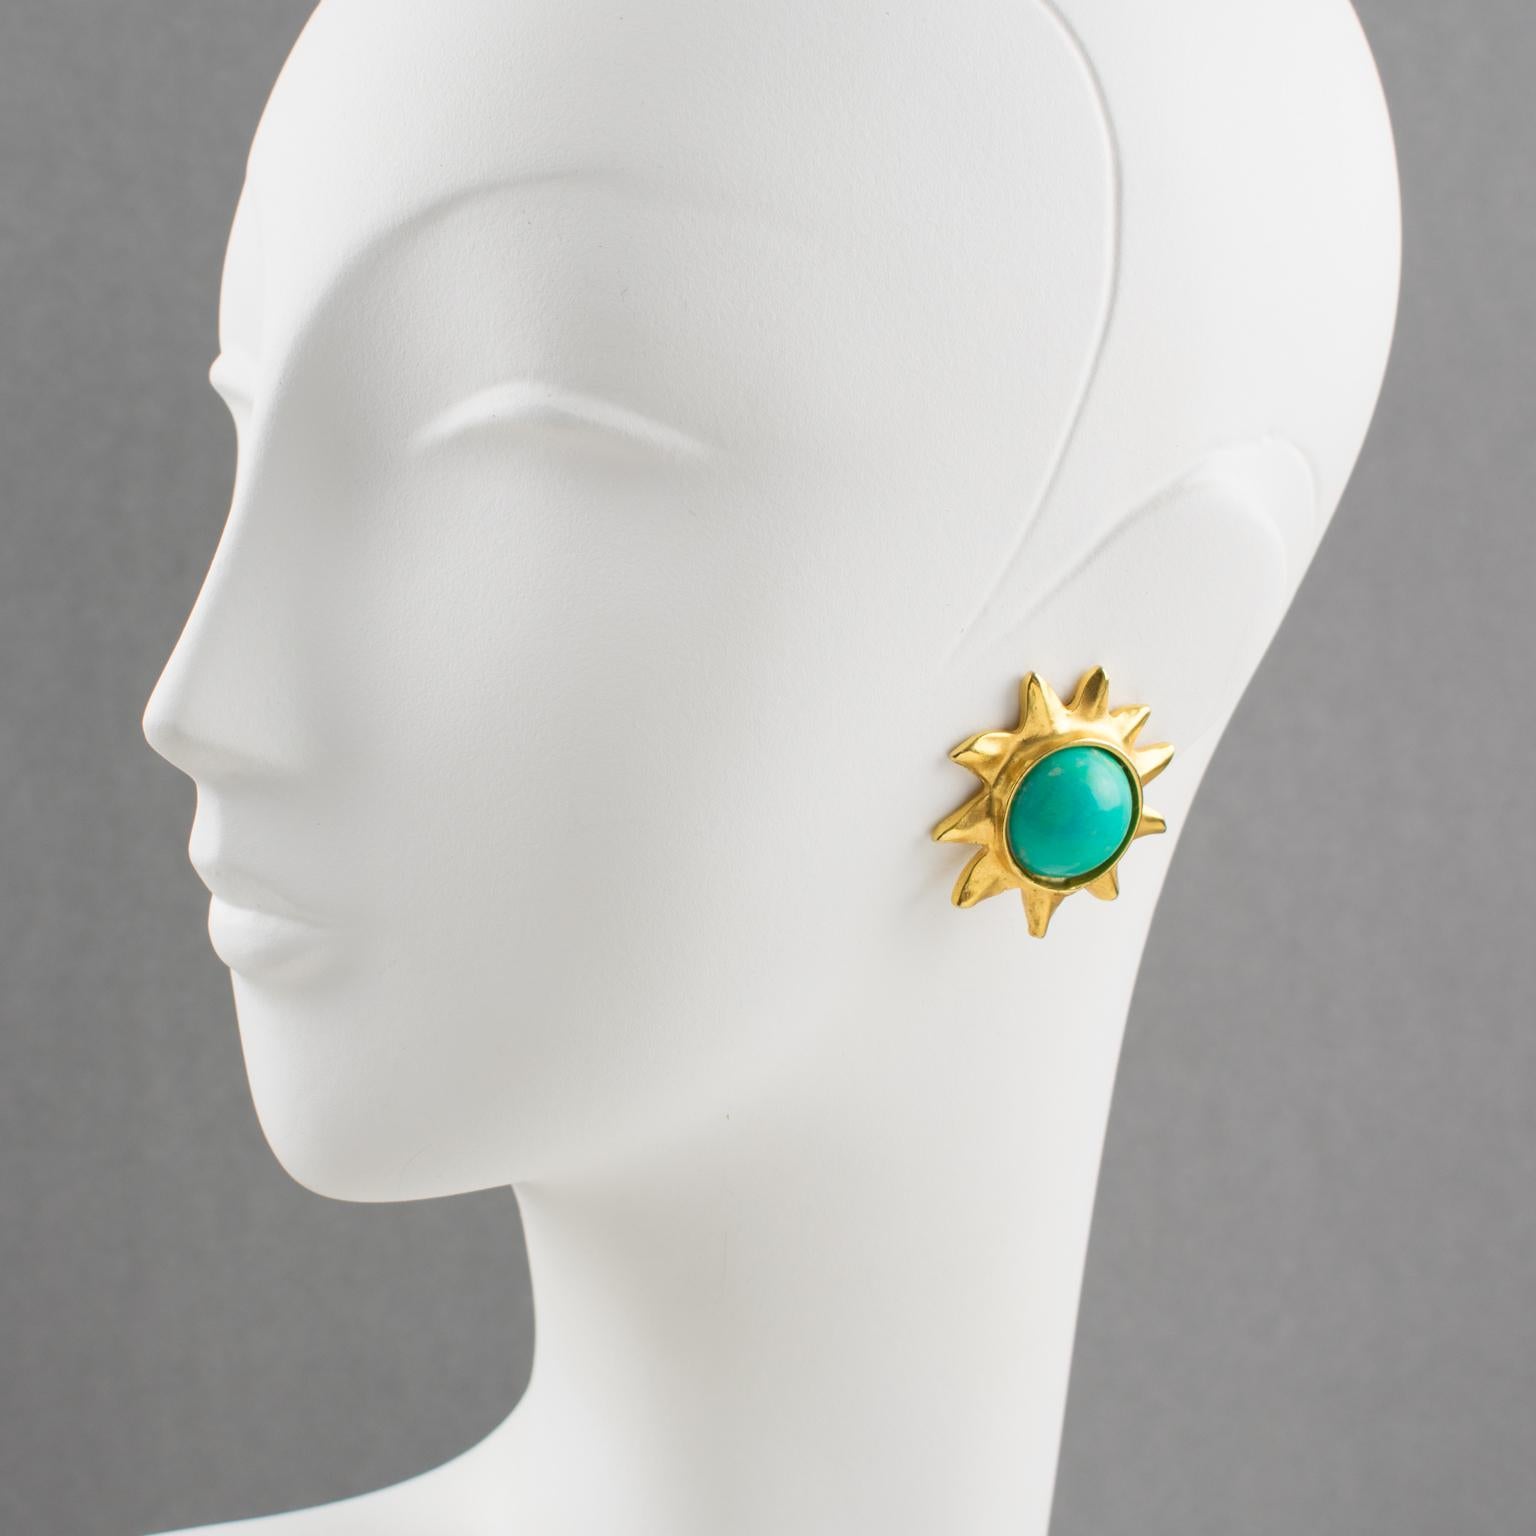 Elegant Edouard Rambaud Paris sun clip-on earrings. Dimensional carved sun with a gilt metal framing and mat finish aspect, topped with turquoise-like resin cabochon. Signed at the back by this well-known French designer. 
Measurements: 1.50 in.